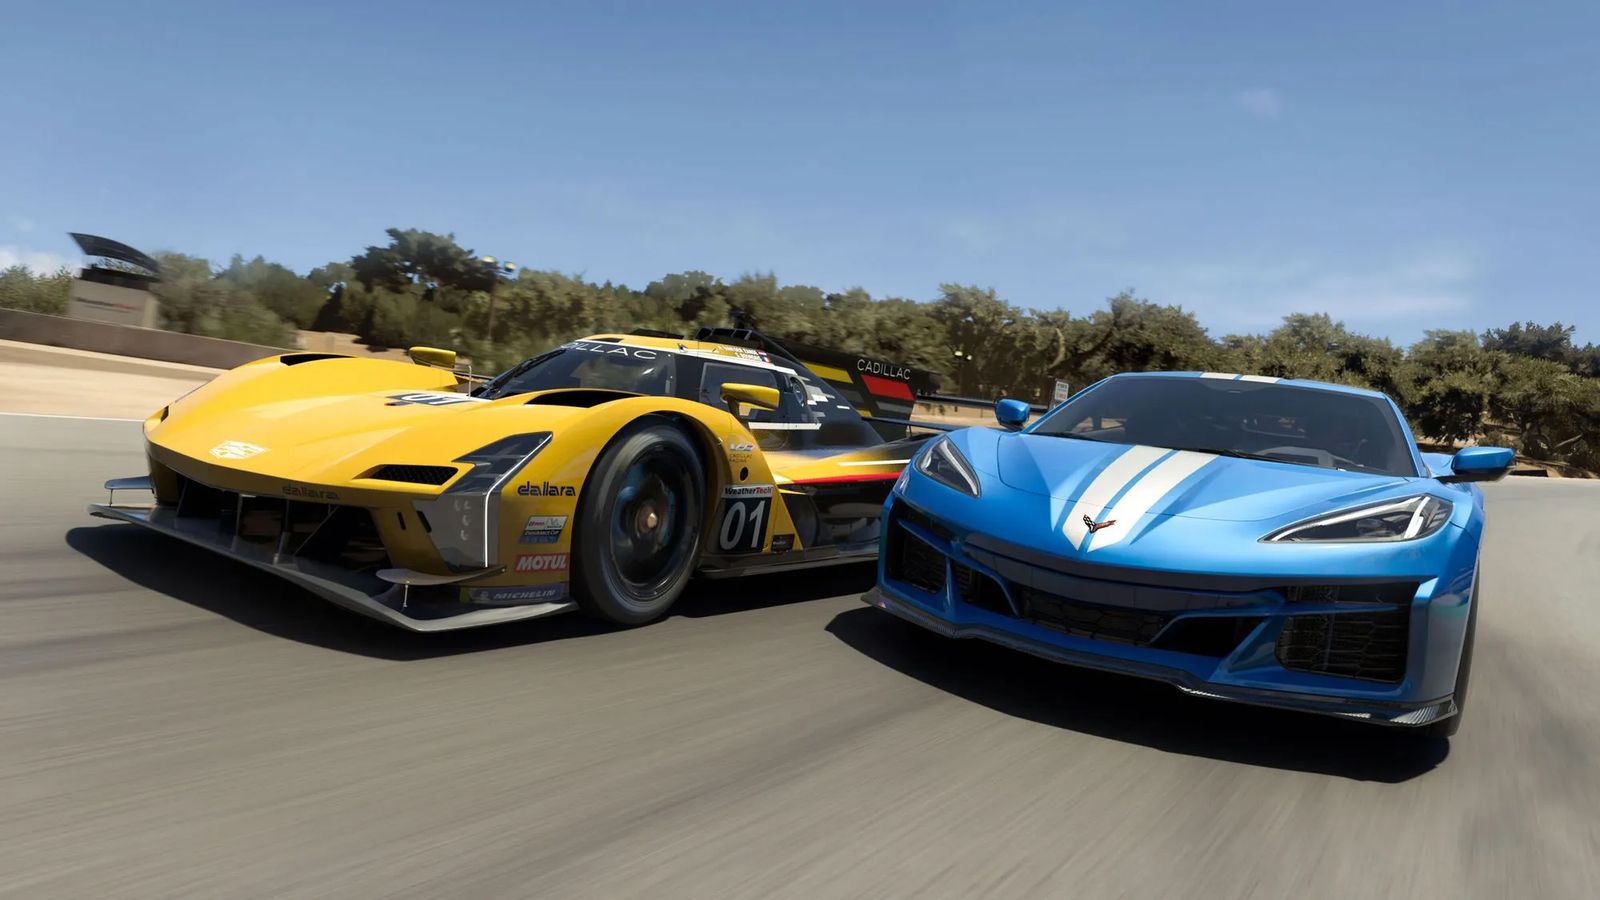 Fastest cars in Forza Motorsport